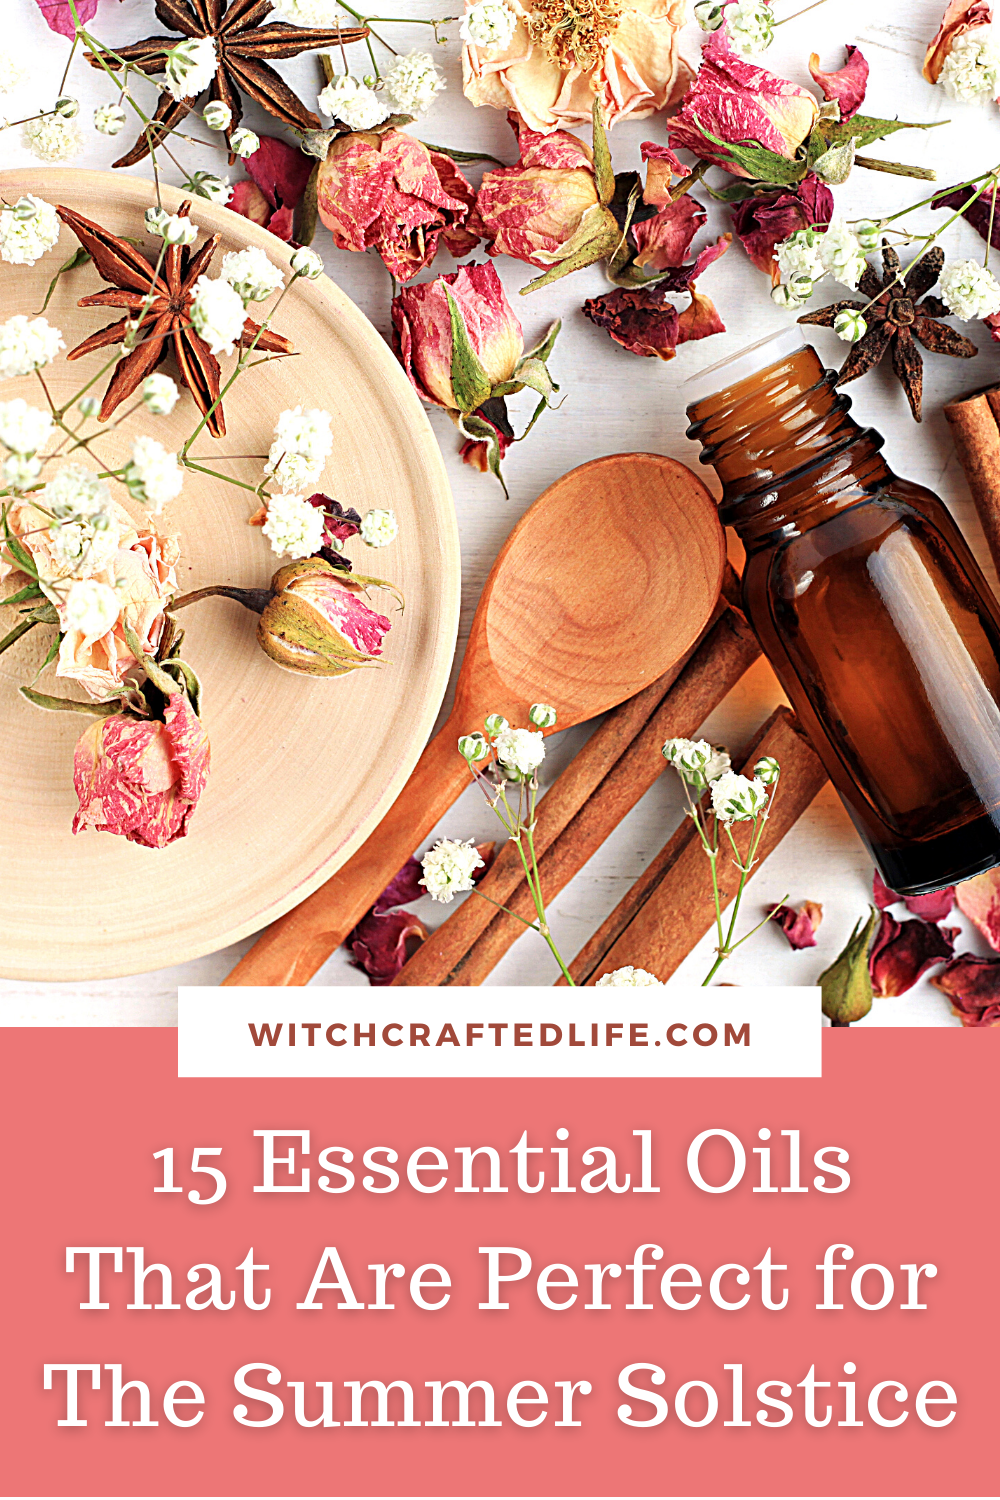 15 Essential Oils That Are Perfect for The Summer Solstice